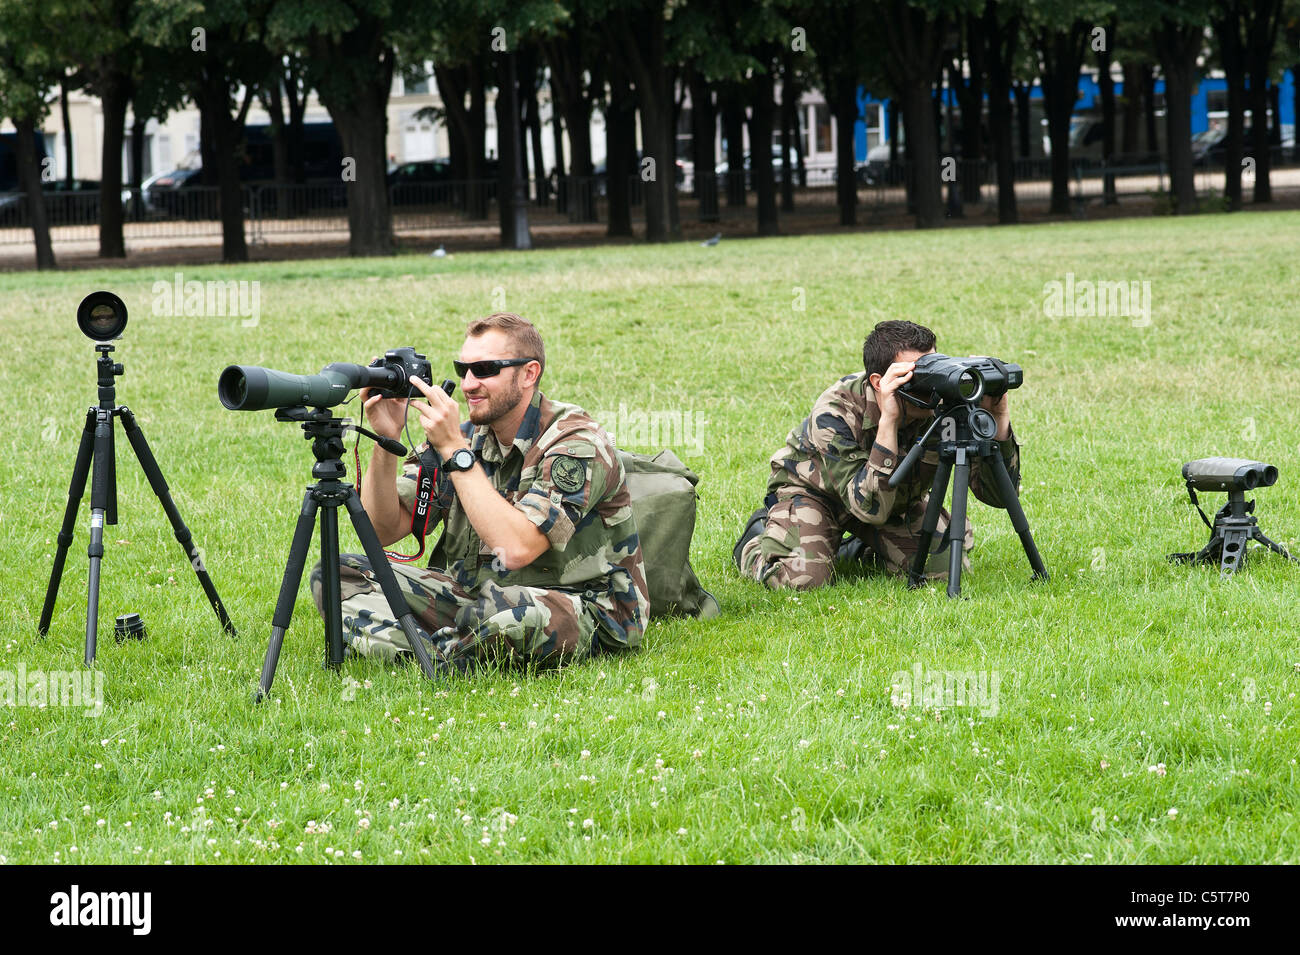 Paris, France - French soldiers demonstrating the use of night vision cameras and binoculars. Stock Photo